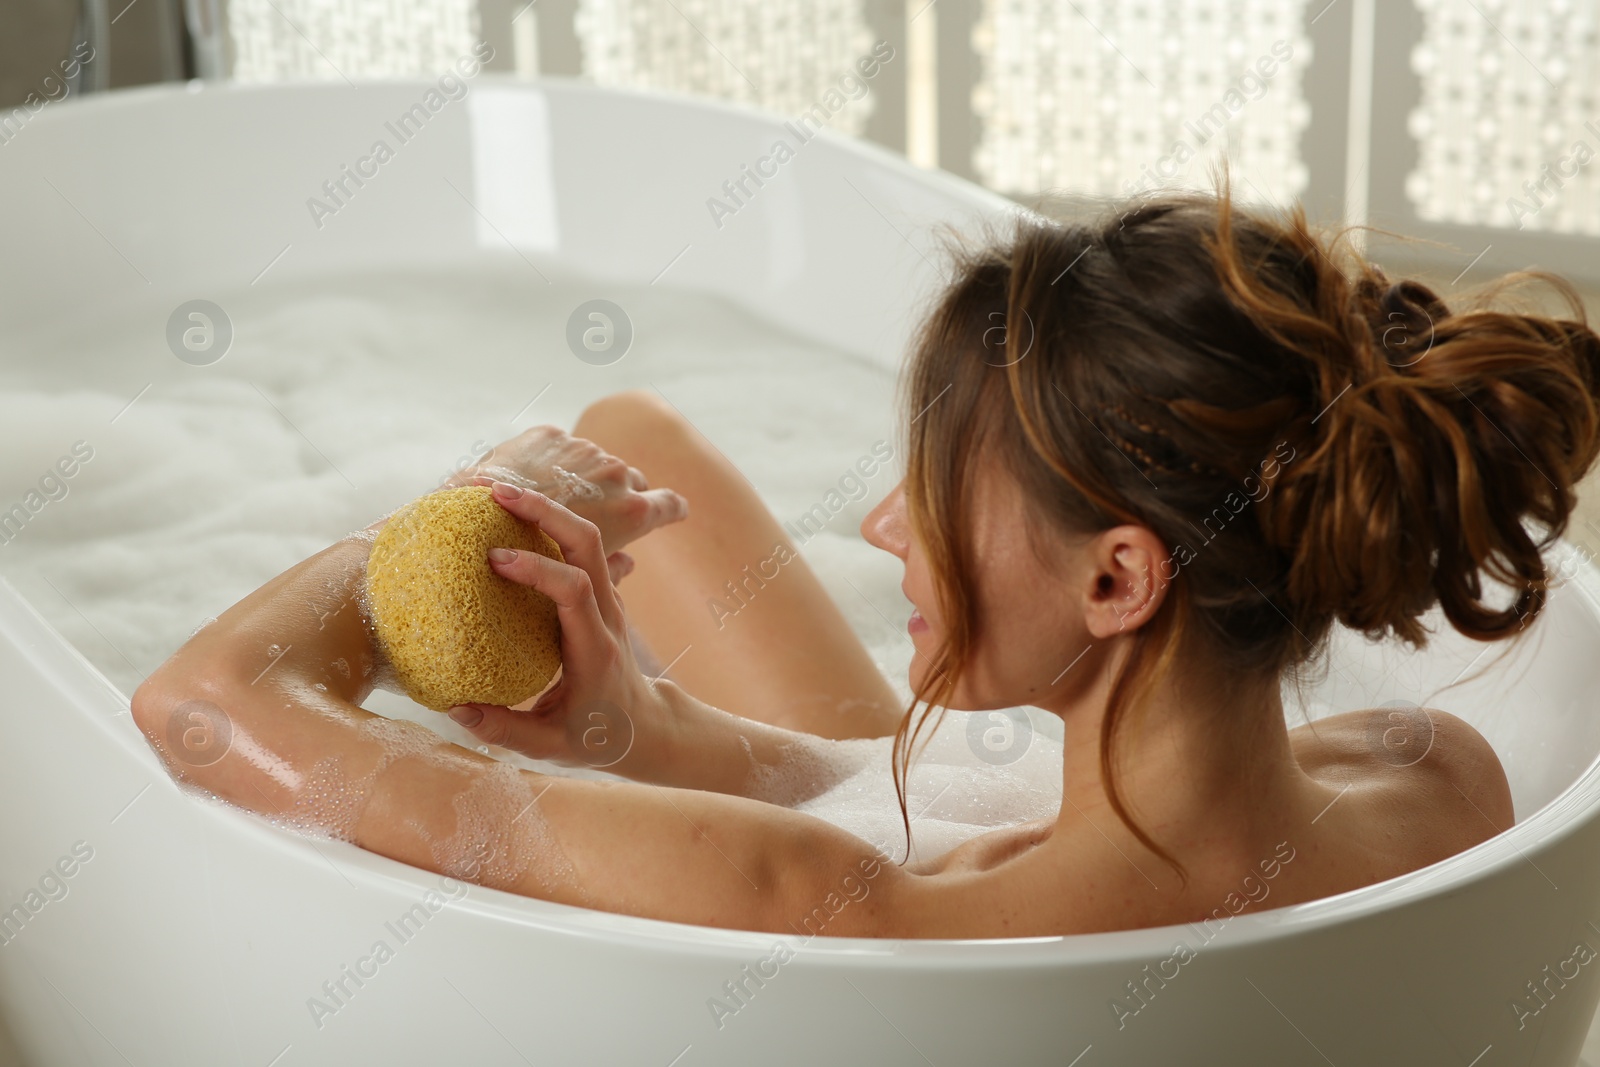 Photo of Woman rubbing her forearm with sponge while taking bath